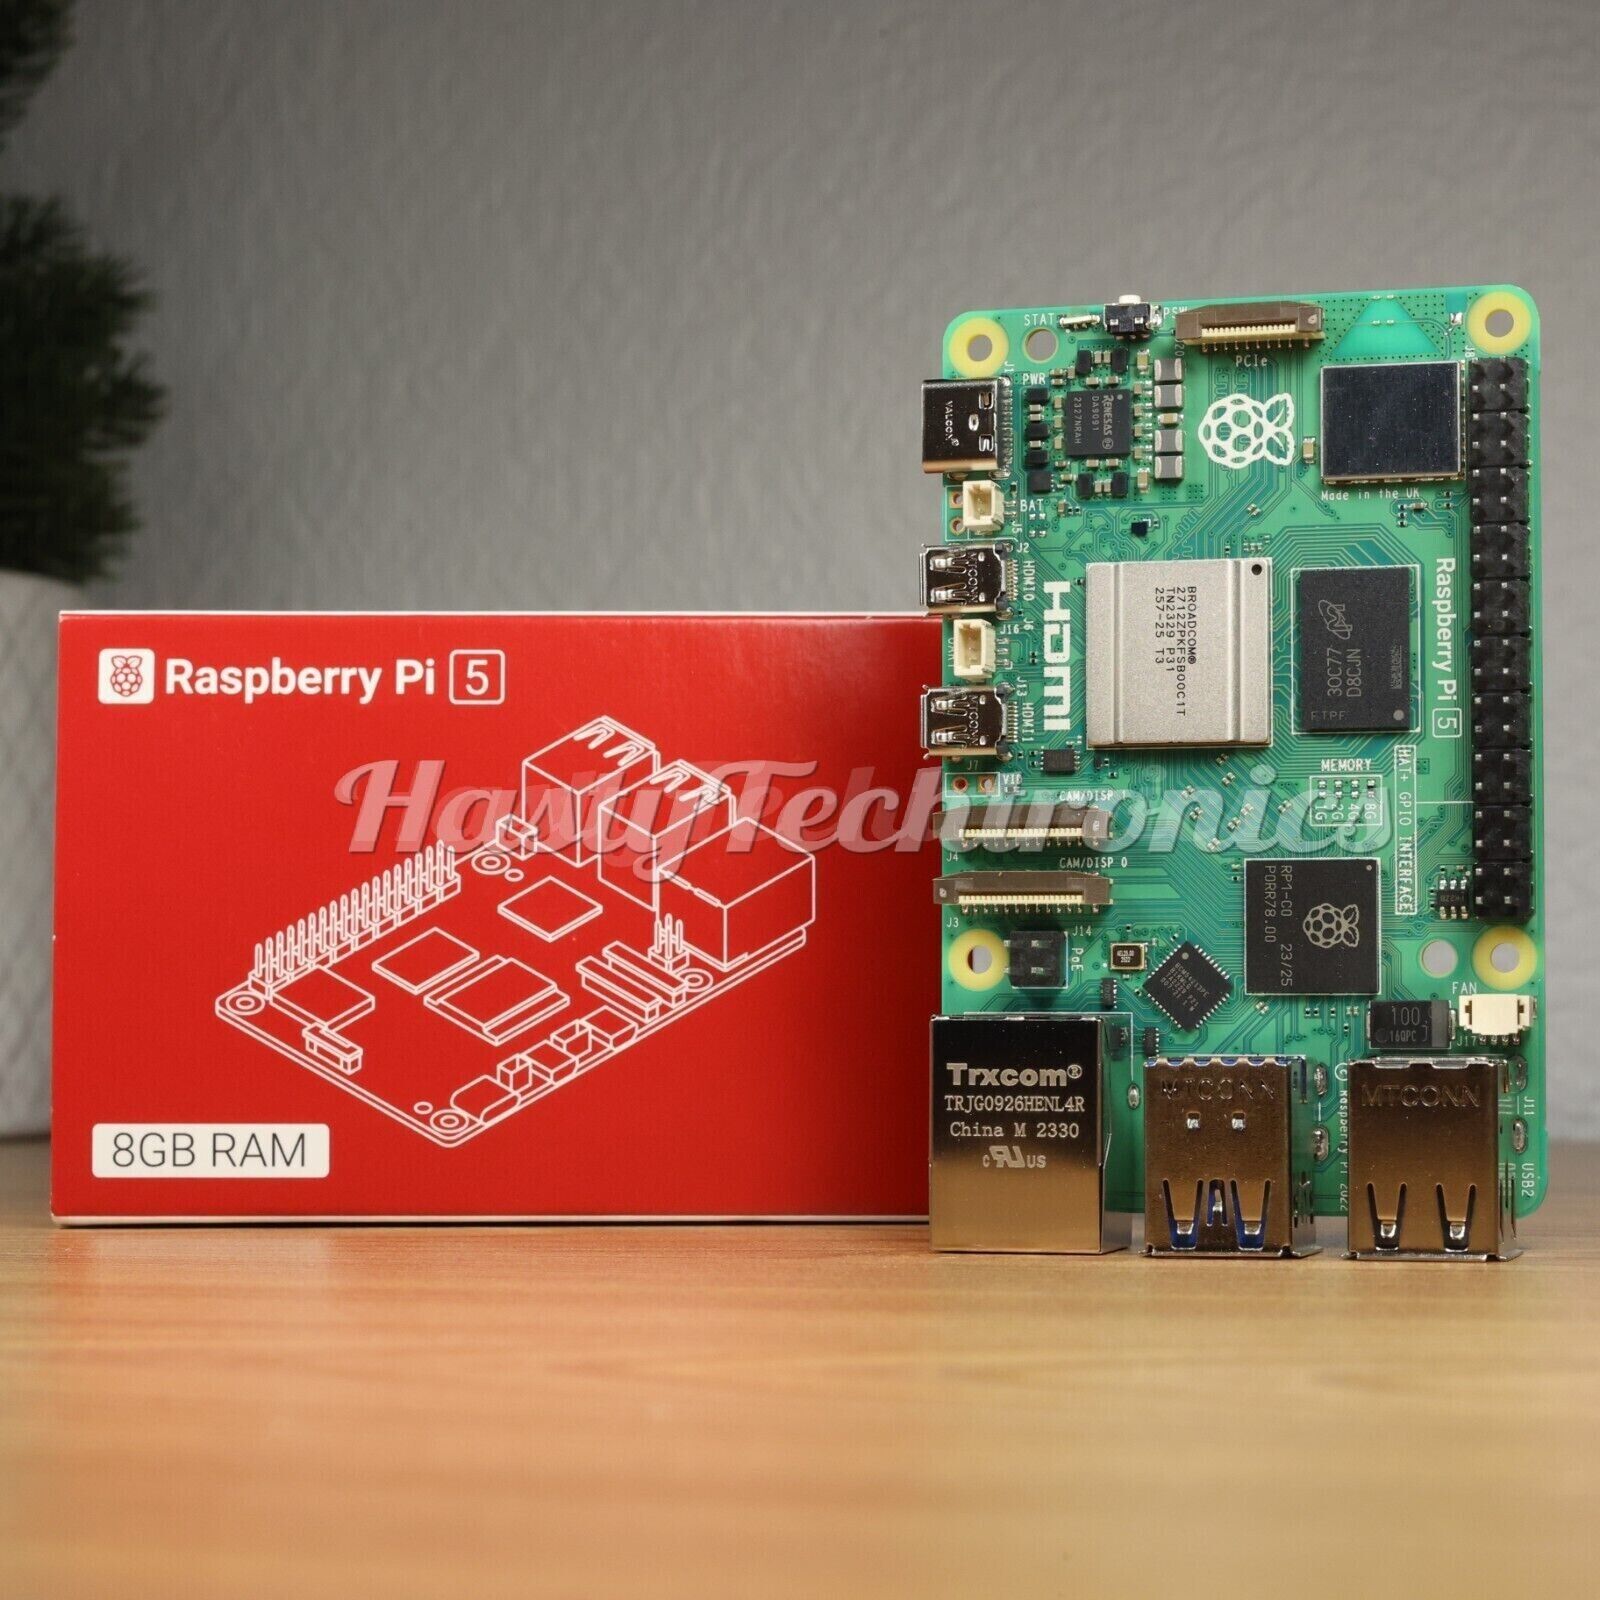 Raspberry pi 5 8GB RAM - New/Sealed - In hand & SHIPS TODAY*